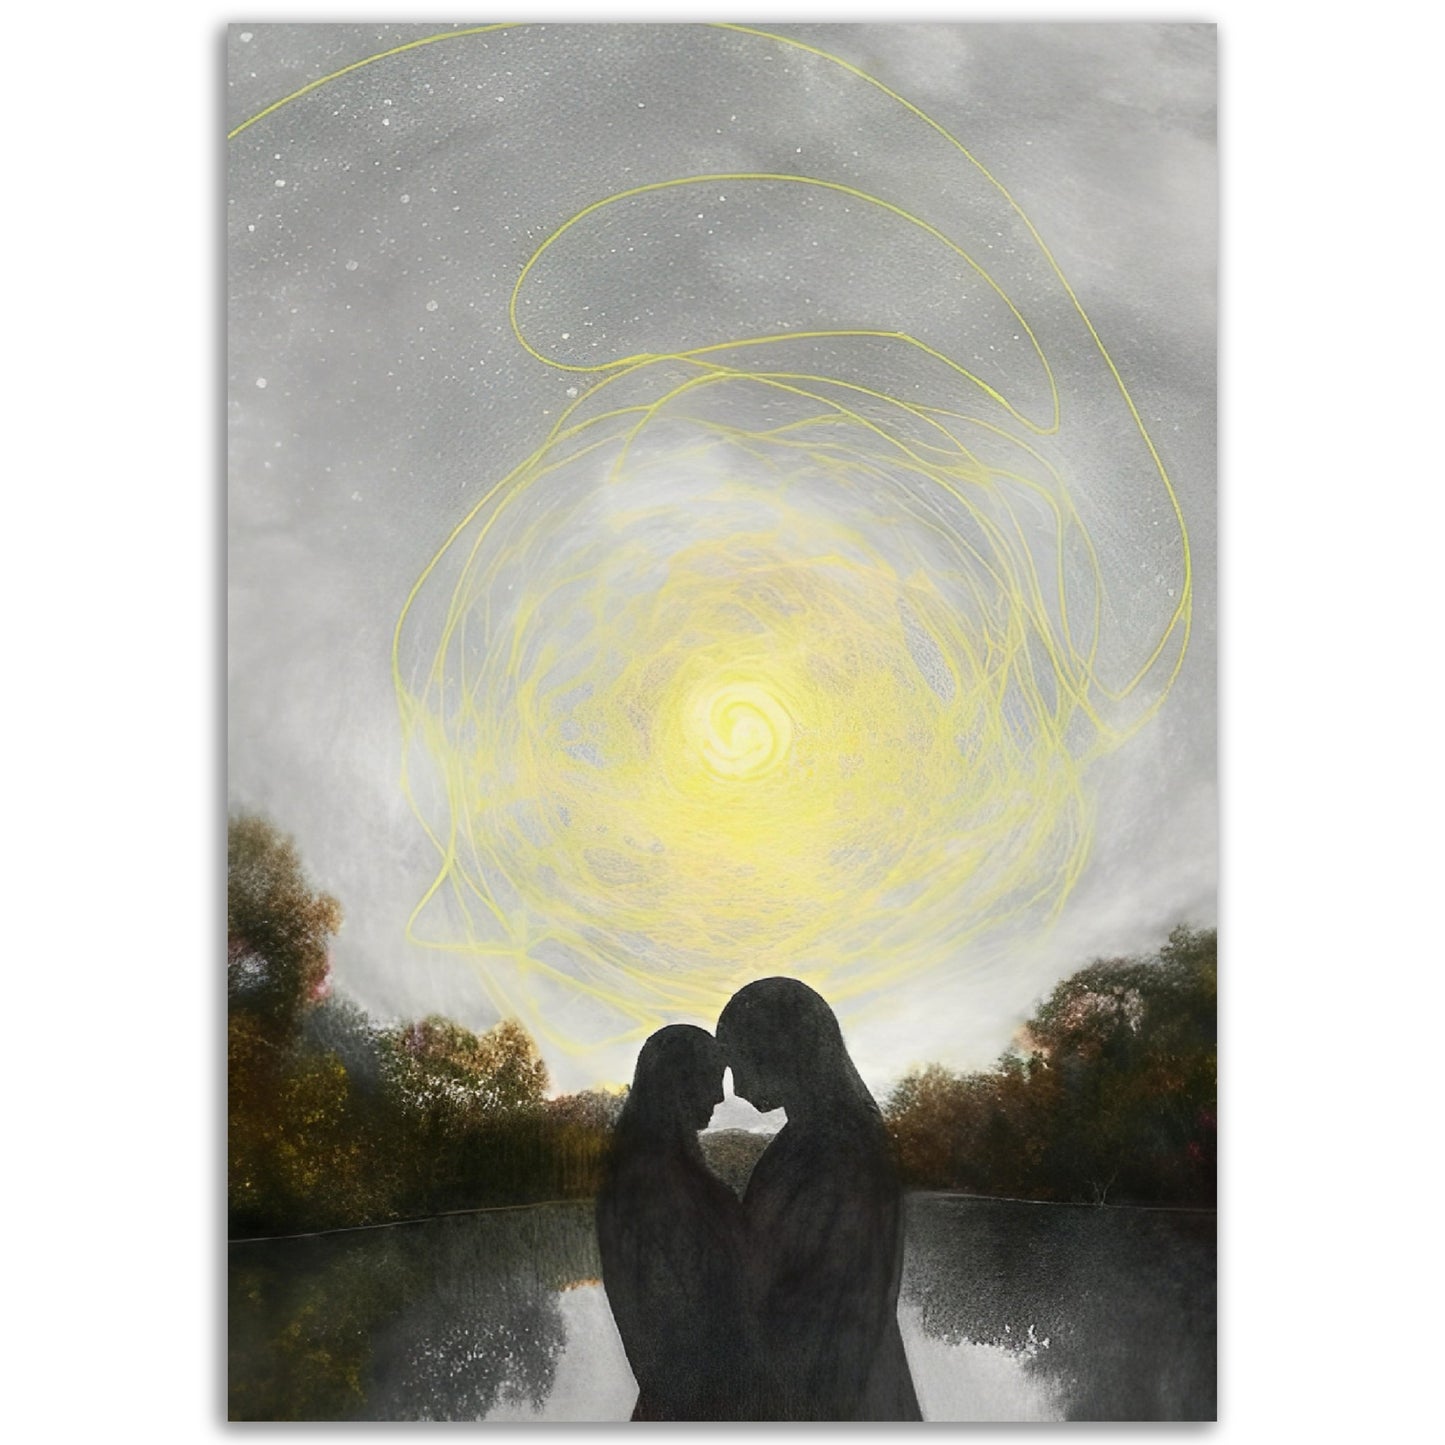 Twin Flames - Spiritual Art Poster by Kaja Borgen. Discover serenity and inspiration with our spiritual art prints and posters. Elevate your sacred space with unique designs on museum-quality paper. Perfect for spiritual seekers and yogis.​​